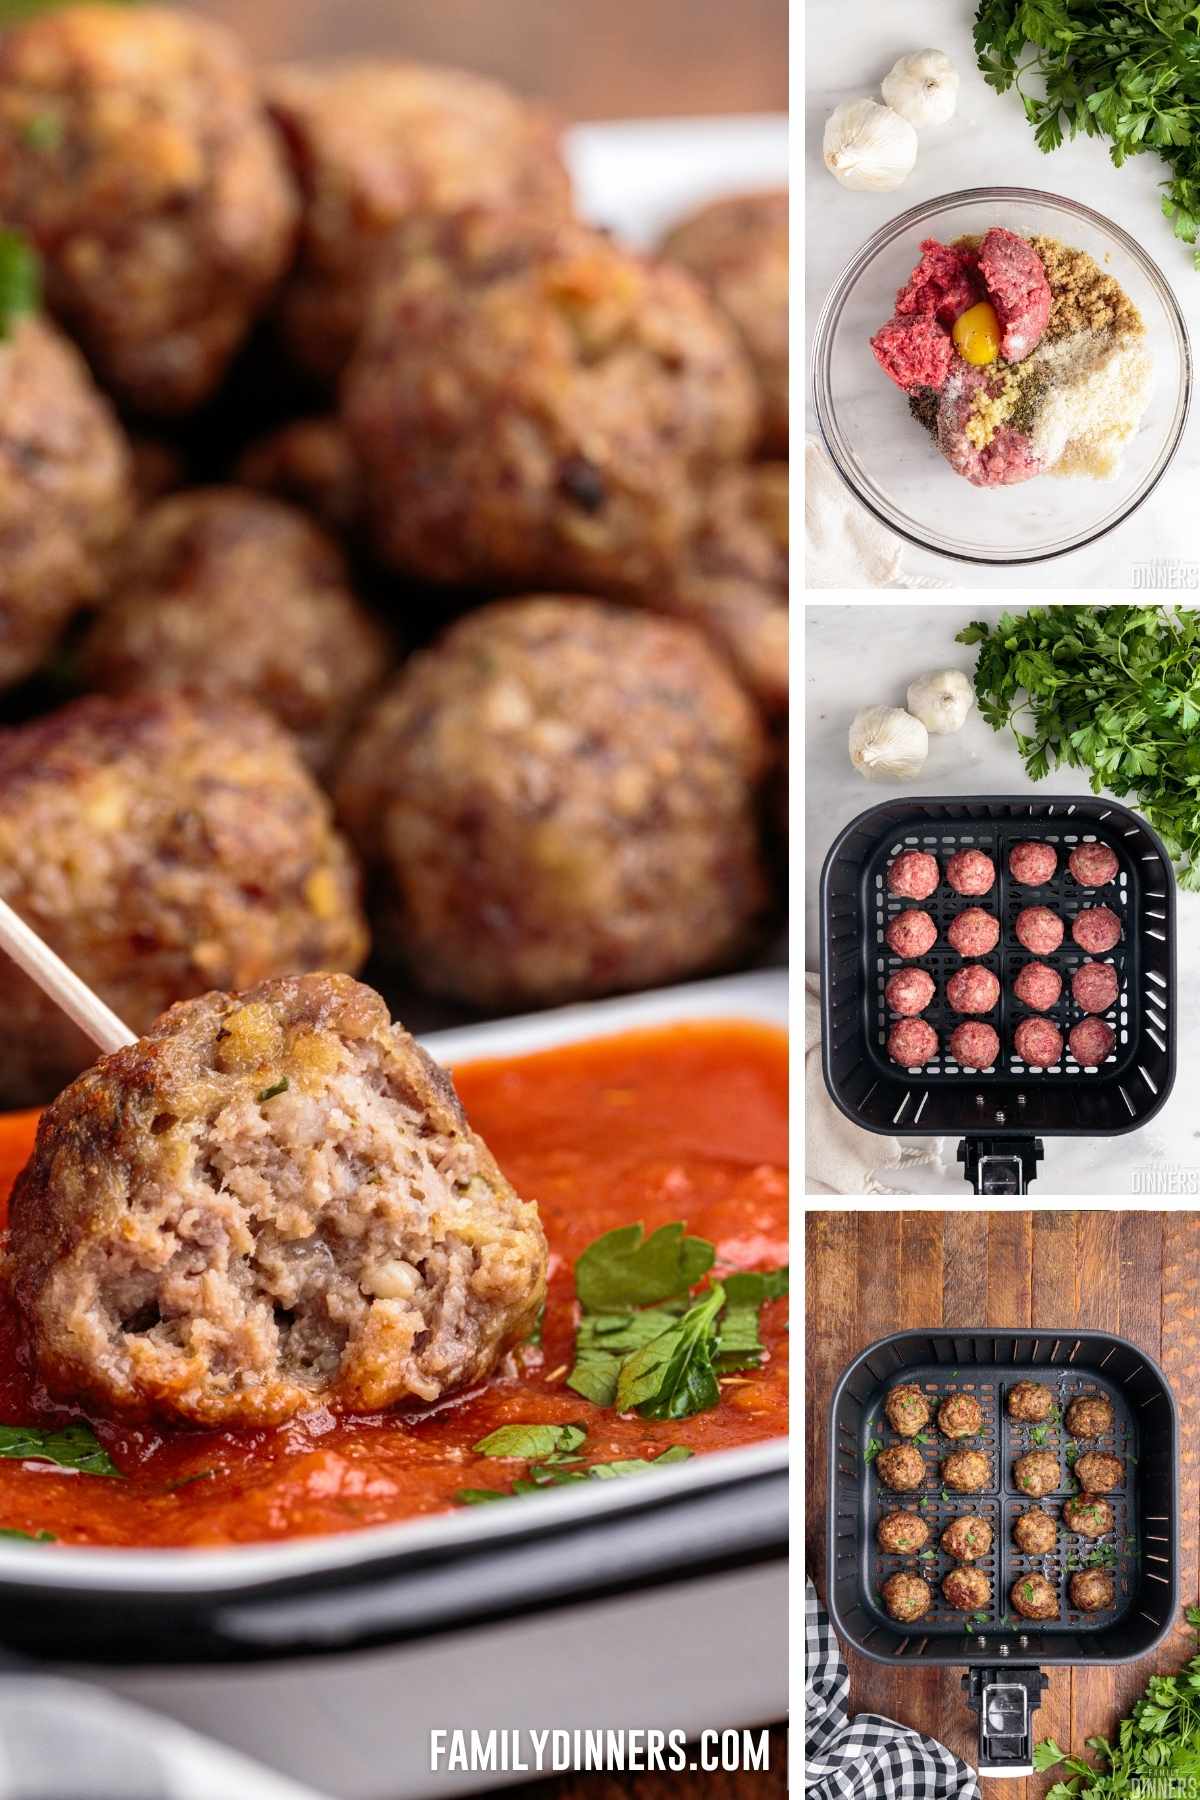 Close-up of meatball being dipped in marinara sauce. Also shown: all ingredients for meatball in a clear mixing bowl; raw meatballs in air fryer basket; cooked meatballs in air fryer.